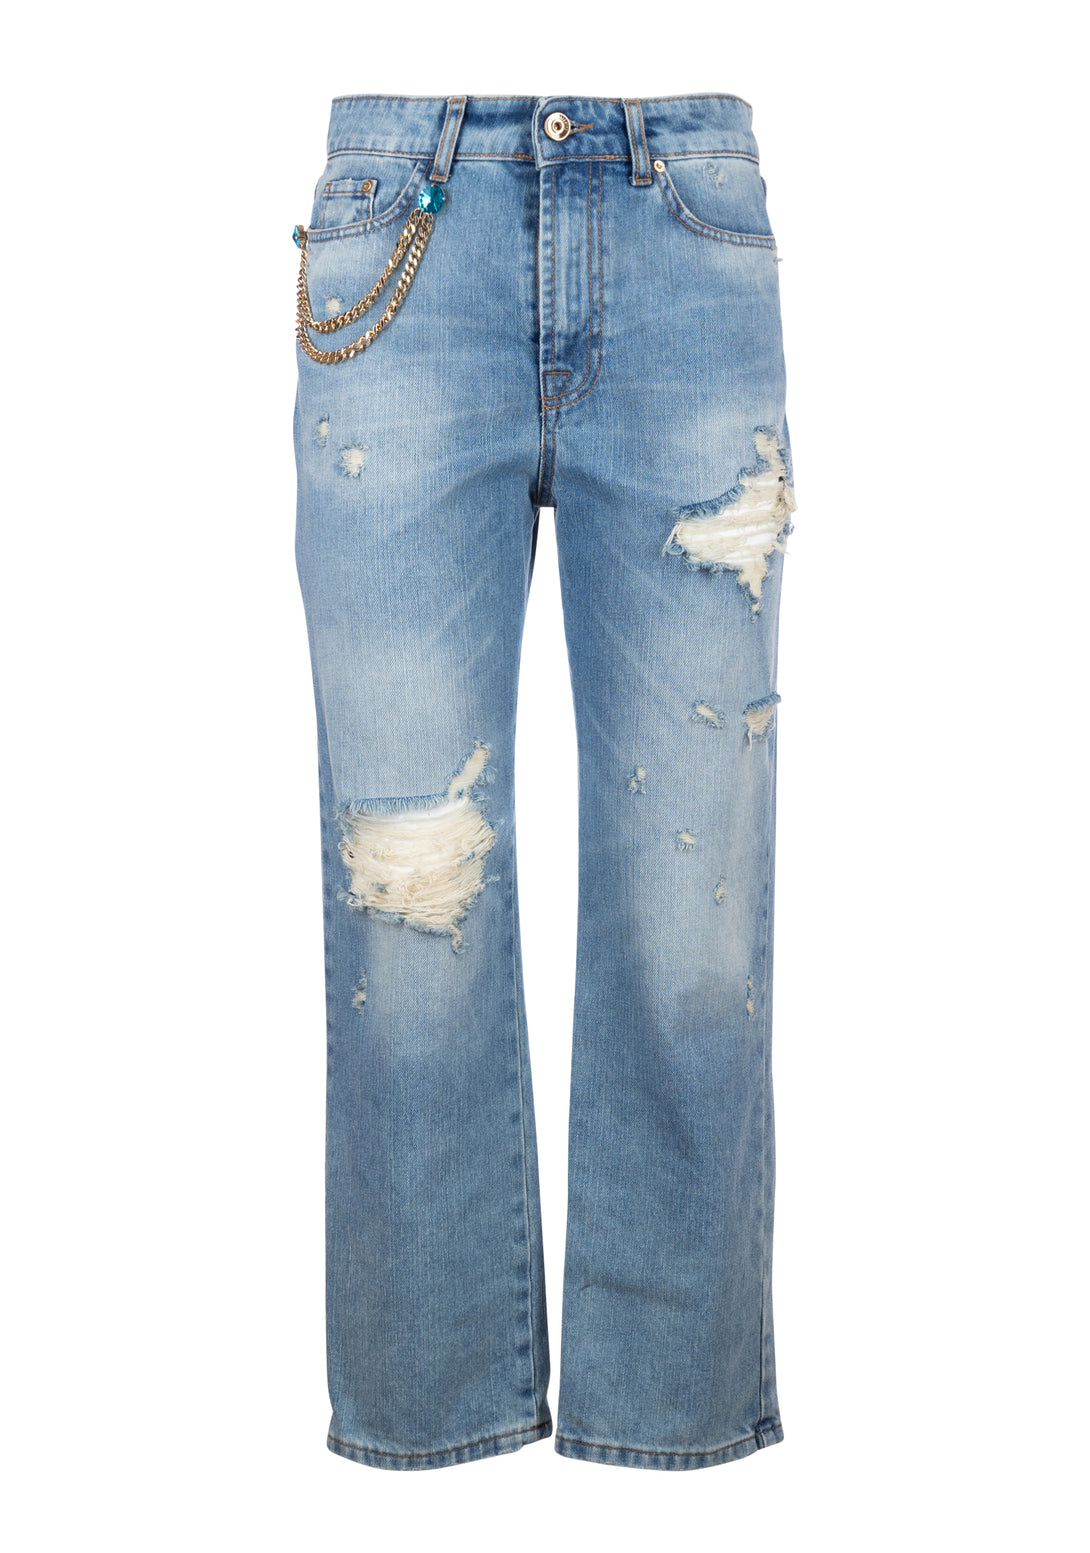 Jeans wide leg made in denim with strong wash